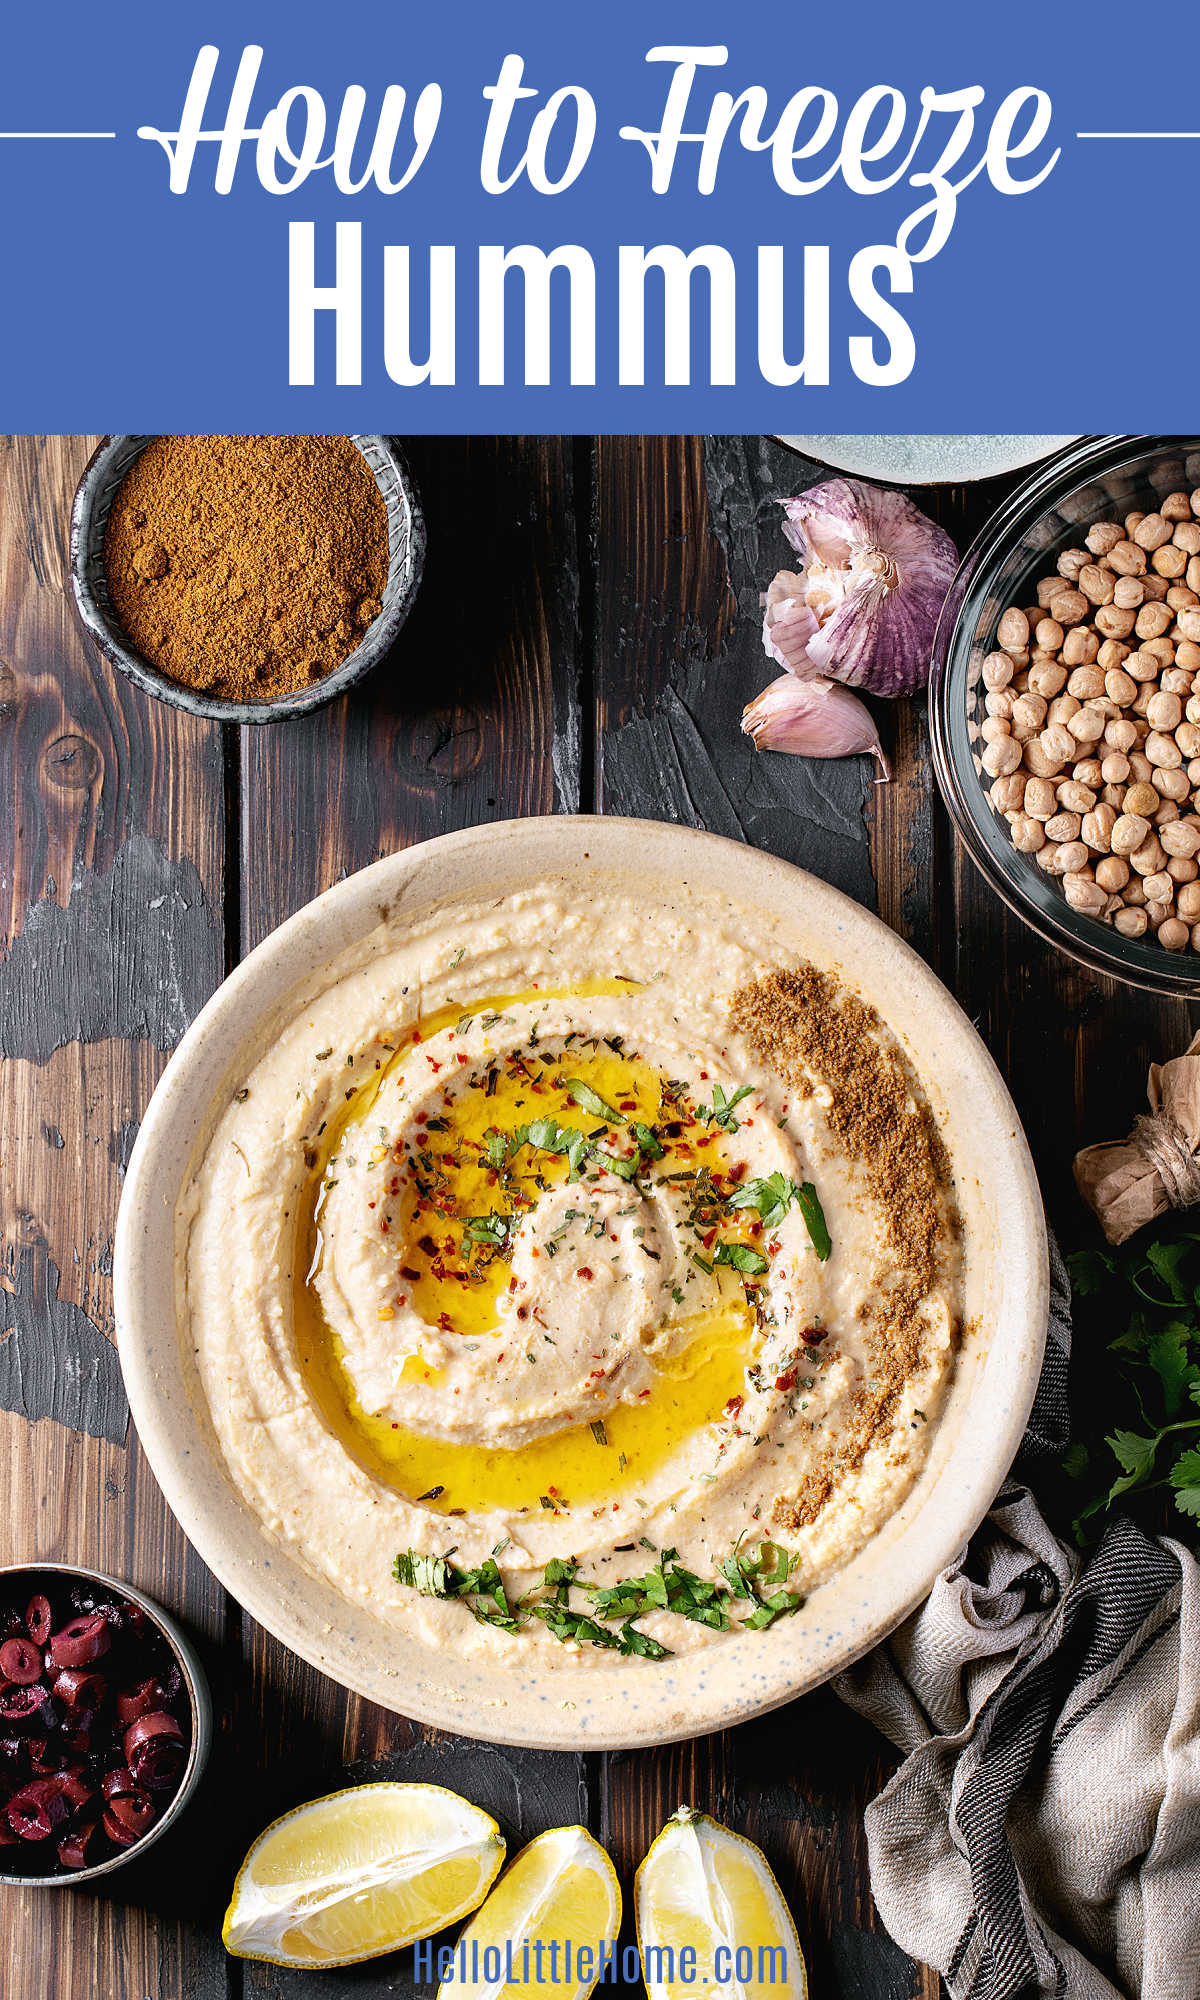 A bowl of hummus on a dark wood table surrounded by the ingredients to make it.